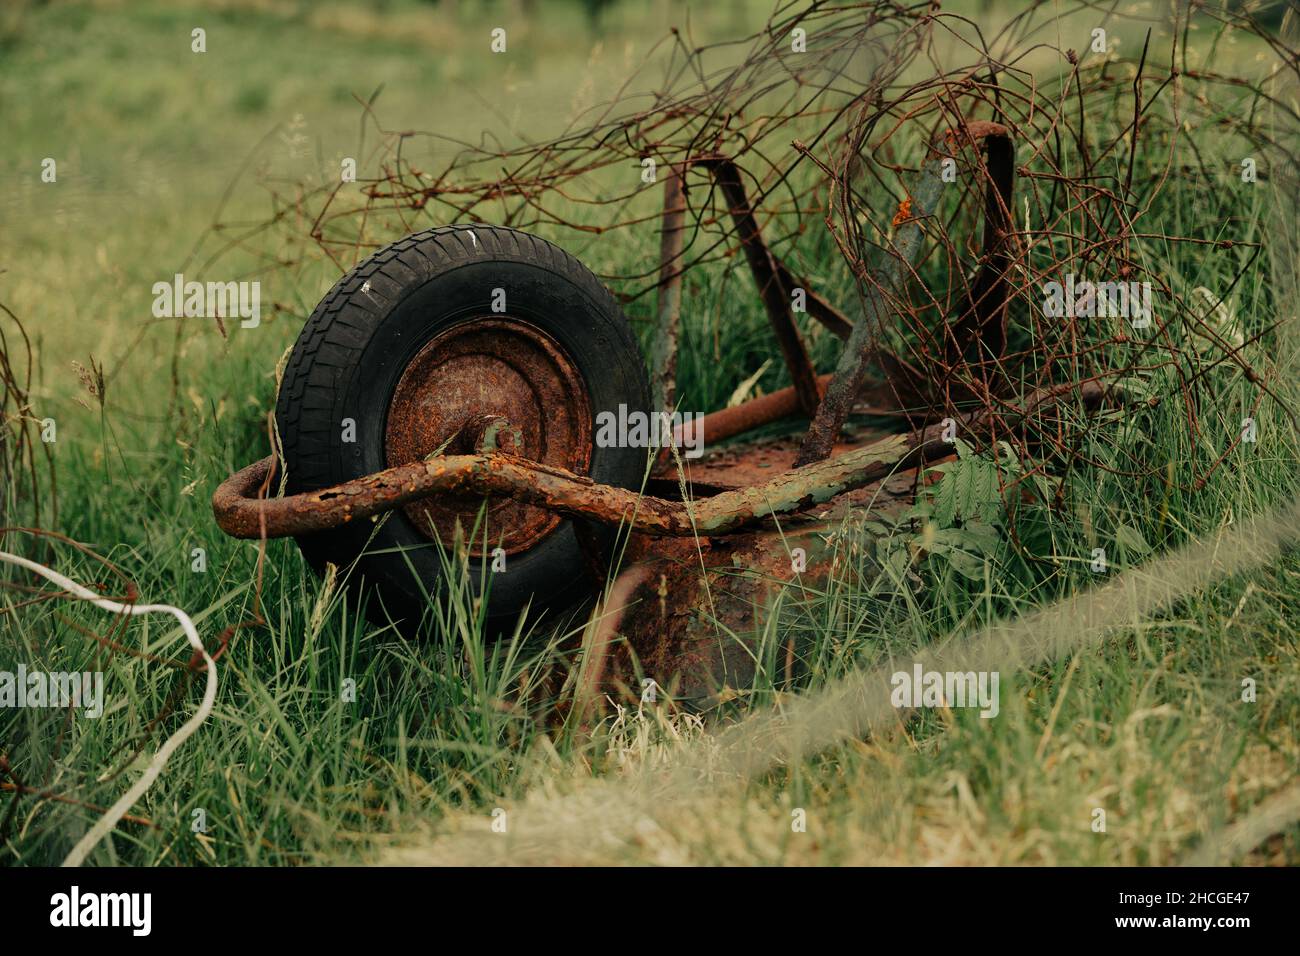 A closeup of a rusty and abandoned cart on a wheel turned upside down in the countryside Stock Photo